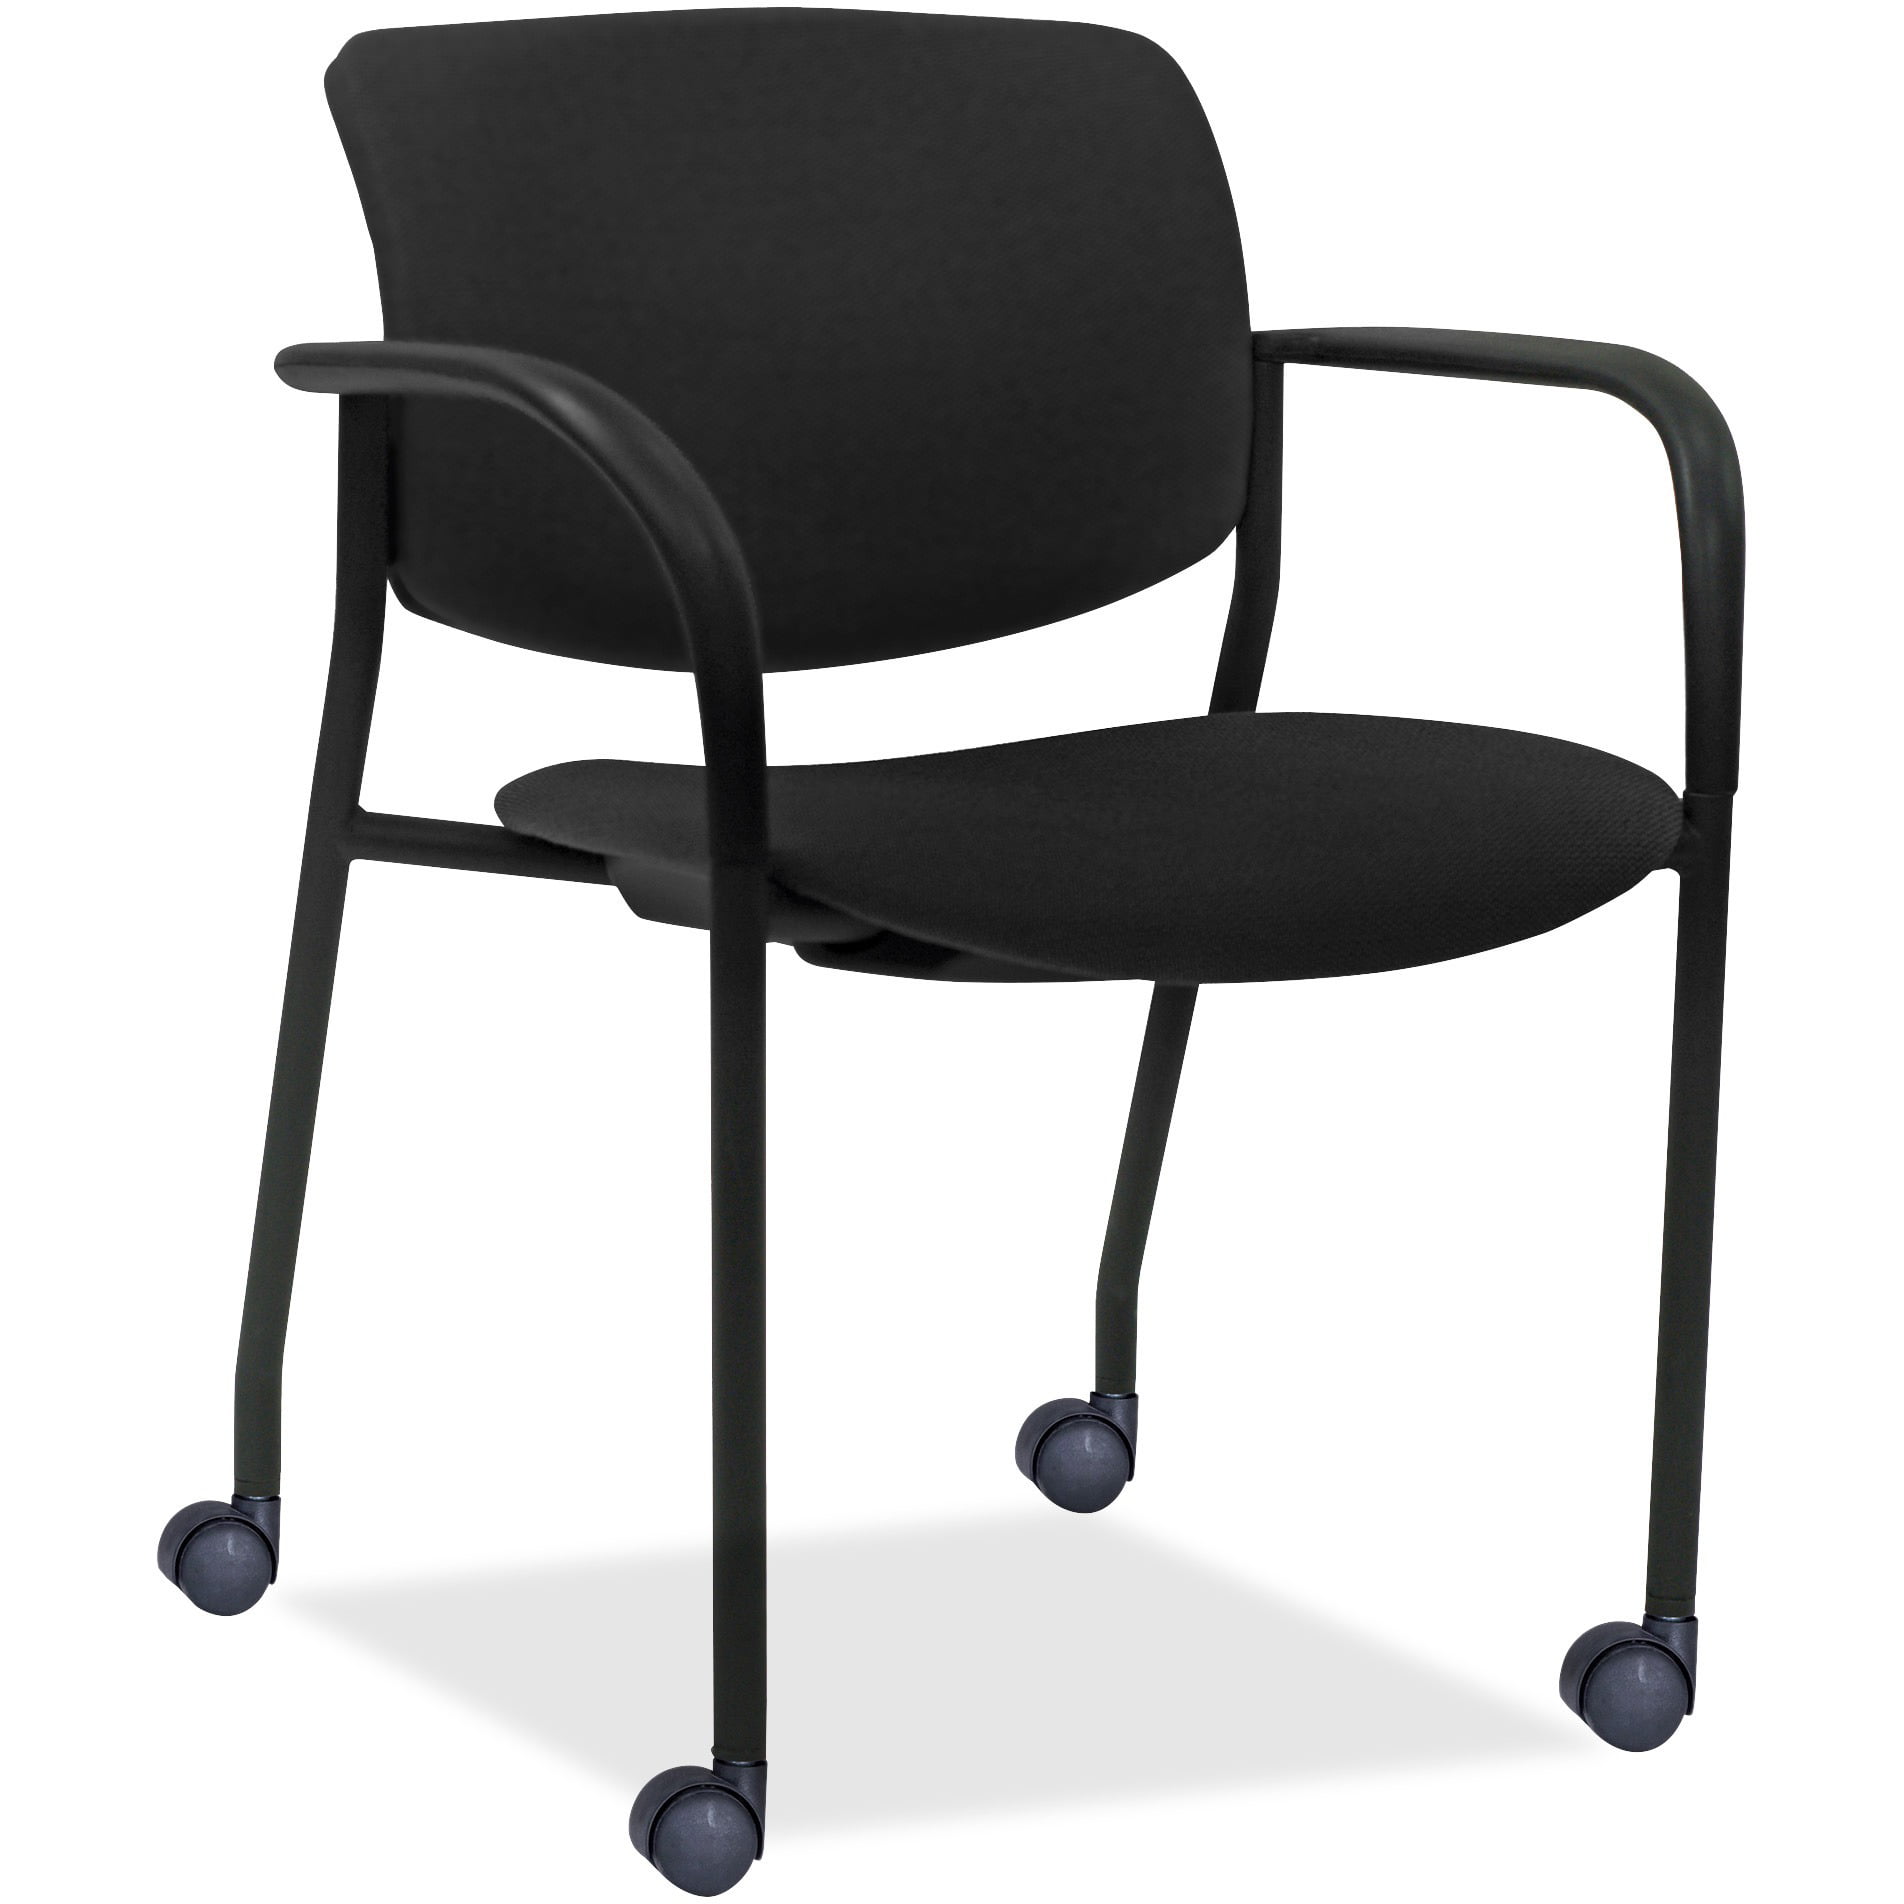 Black Seat w/ Silver Mist Frame NOR-FEI1059BK-SO Norwood Commercial Furniture Heavy-Duty Plastic Stacking Chair Pack of 4 